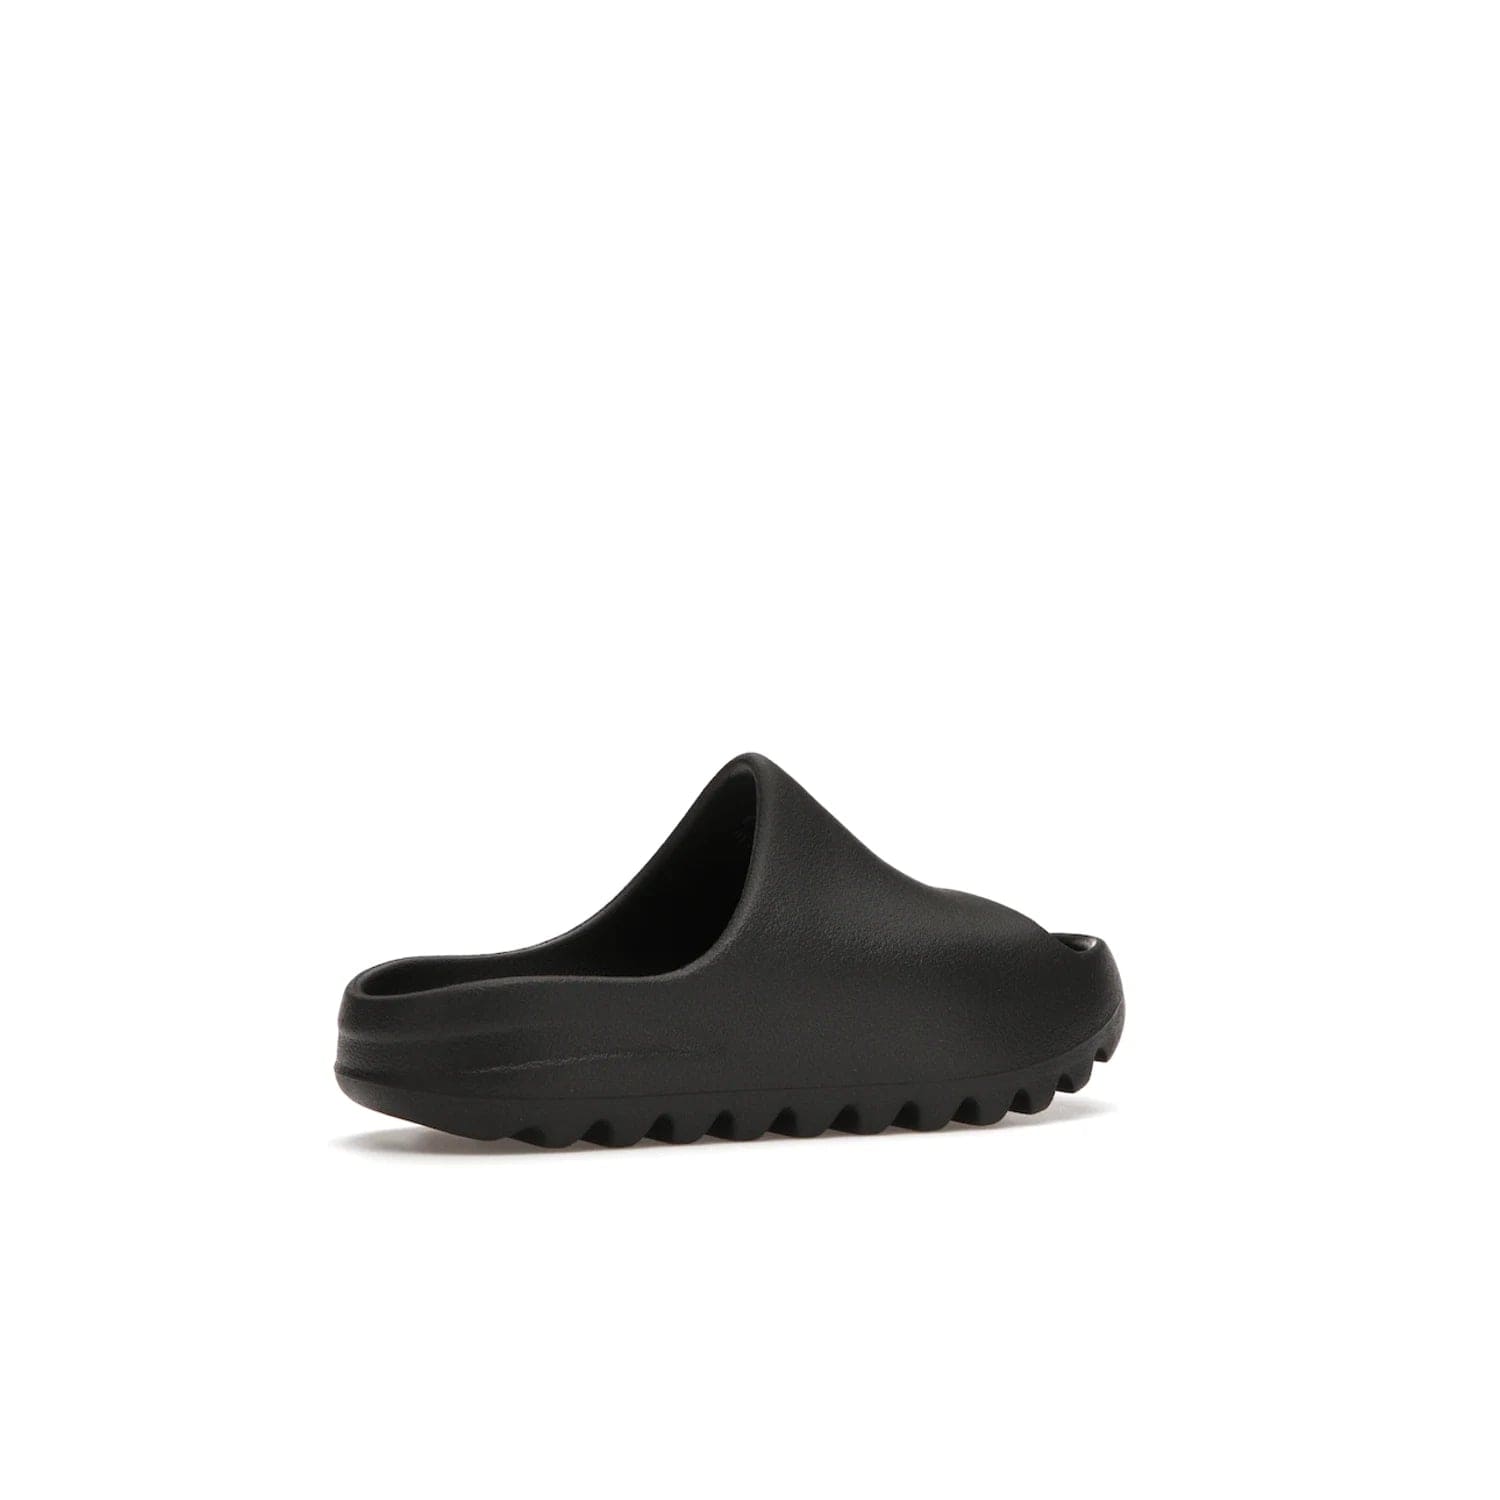 adidas Yeezy Slide Onyx (Kids) - Image 34 - Only at www.BallersClubKickz.com - adidas Yeezy Slide Onyx (Kids): Comfortable foam construction with textured surface and iconic three-stripe logo. Breathable, open-toe design and deep grooves for traction. Released in March 2021 at $50.